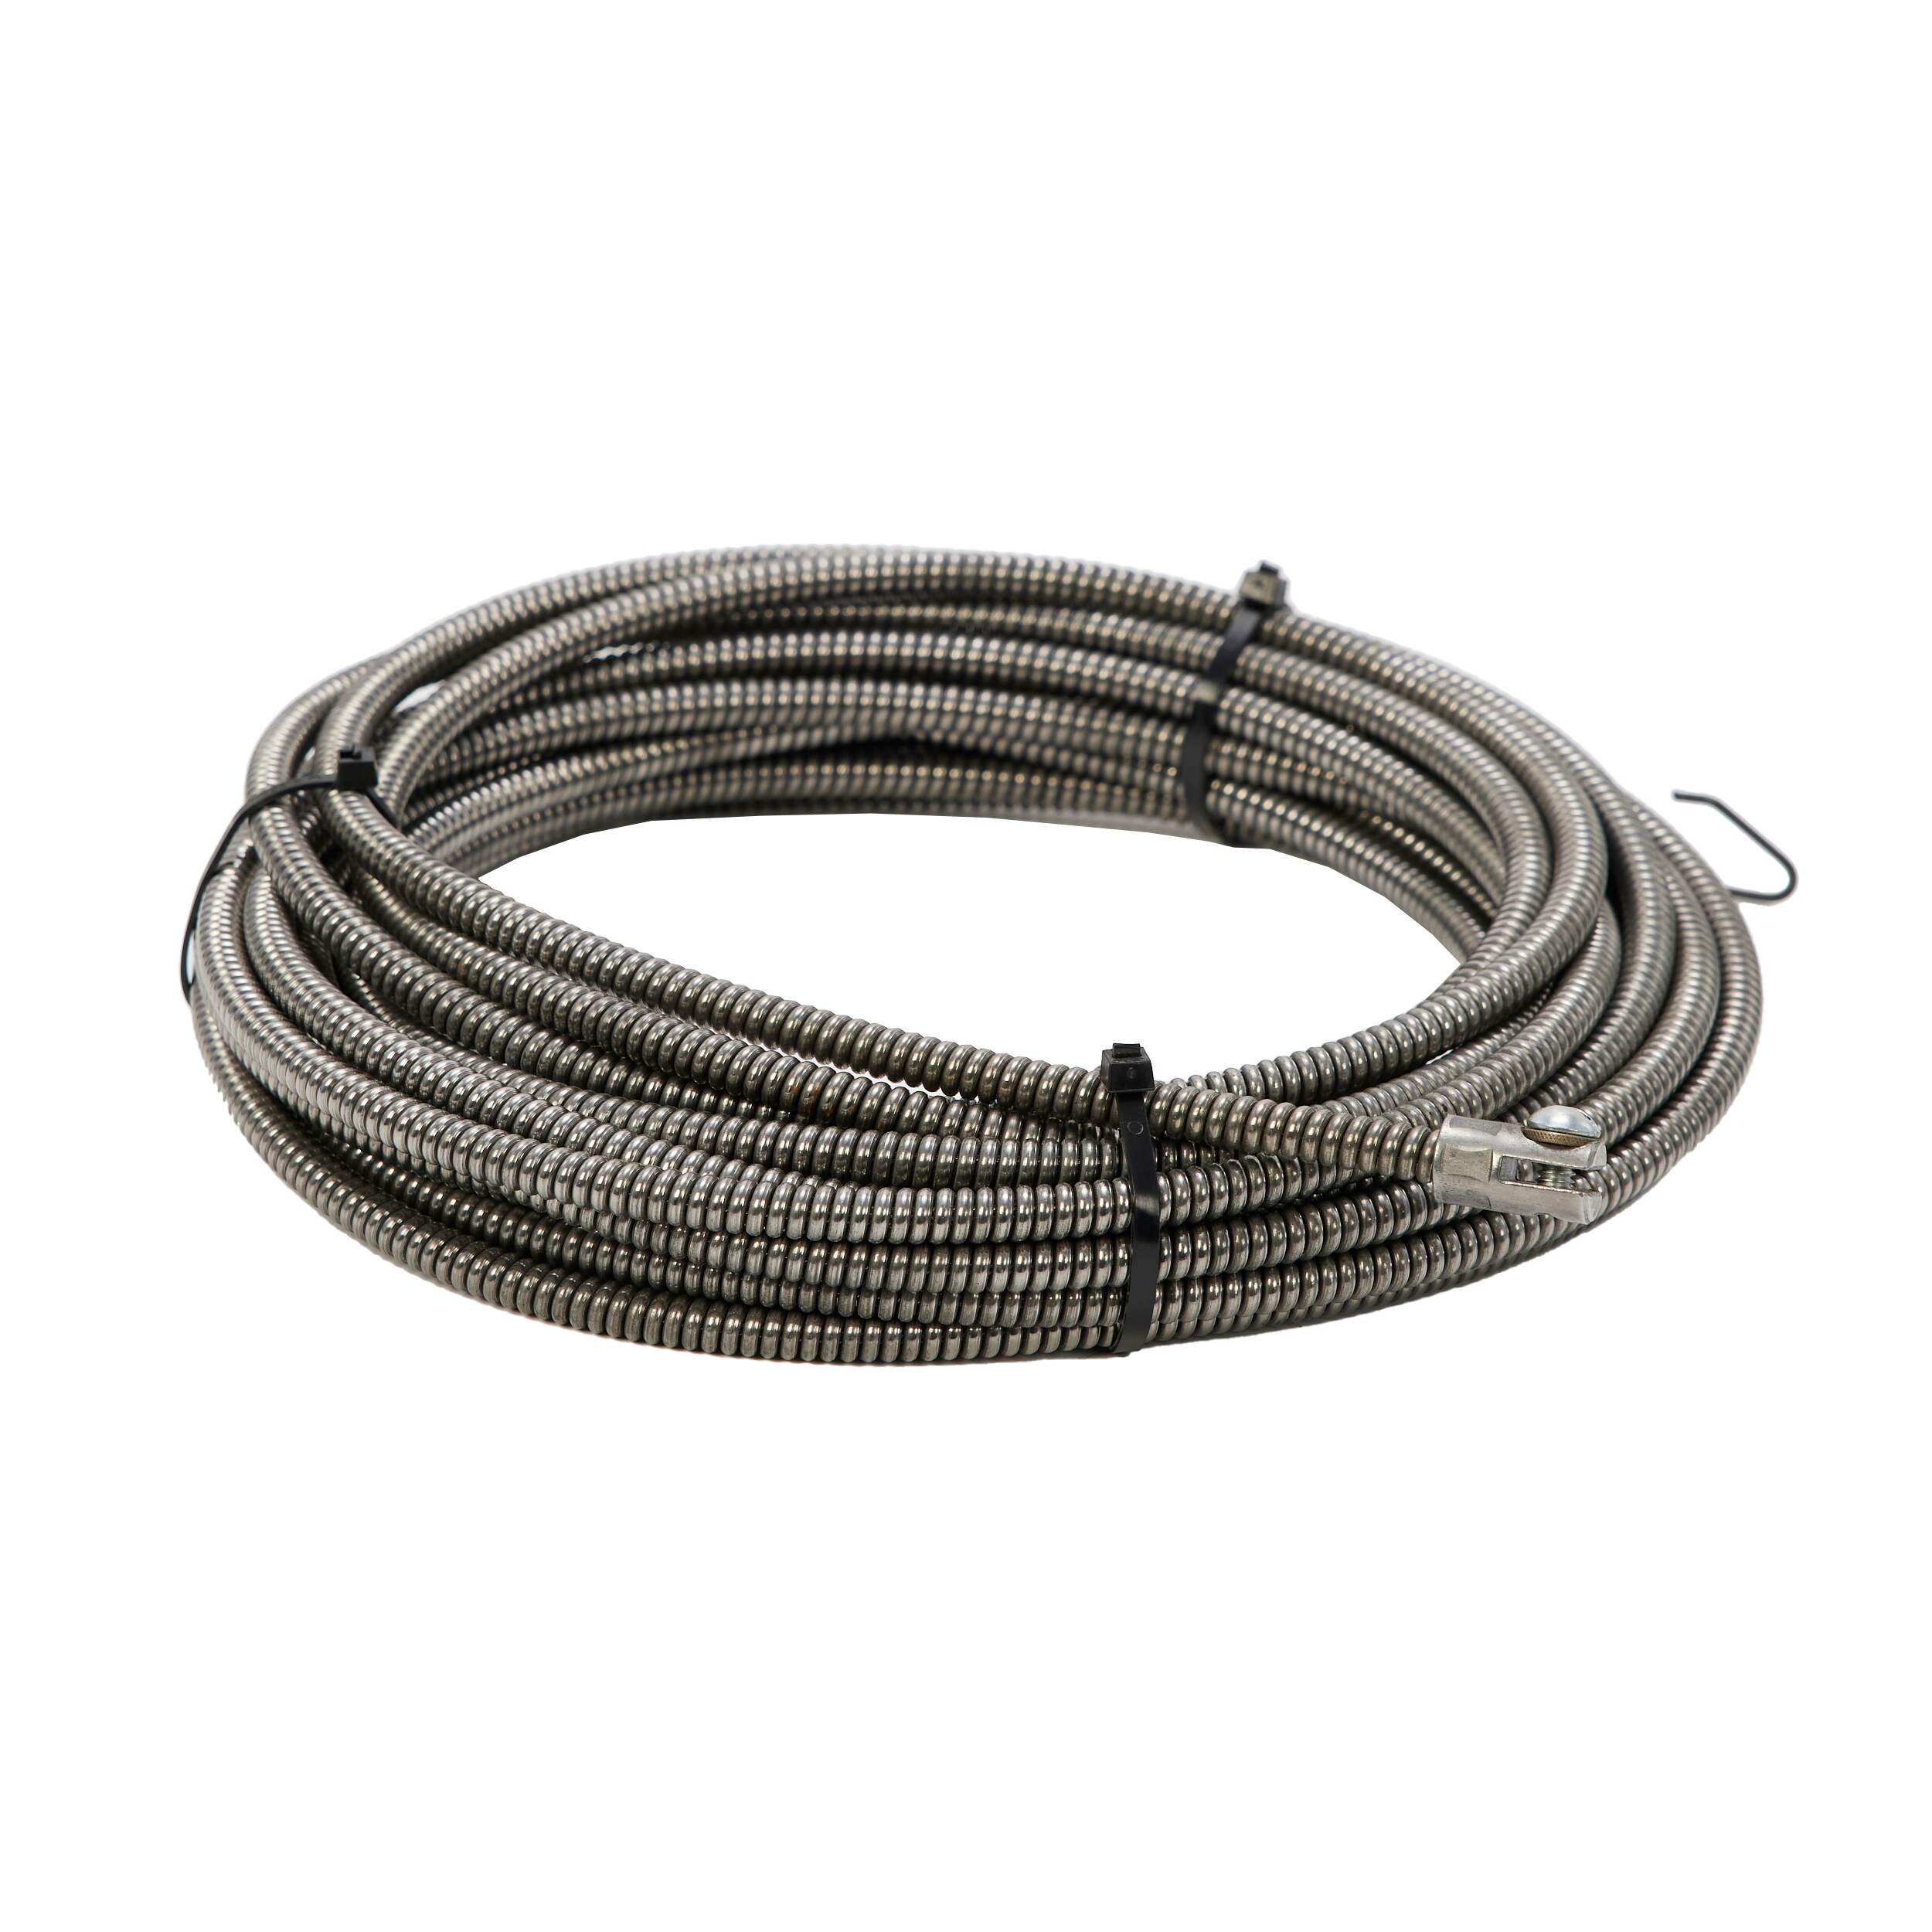 RIDGID Drain Cleaning Cable, 5/16 In. x 35 ft.